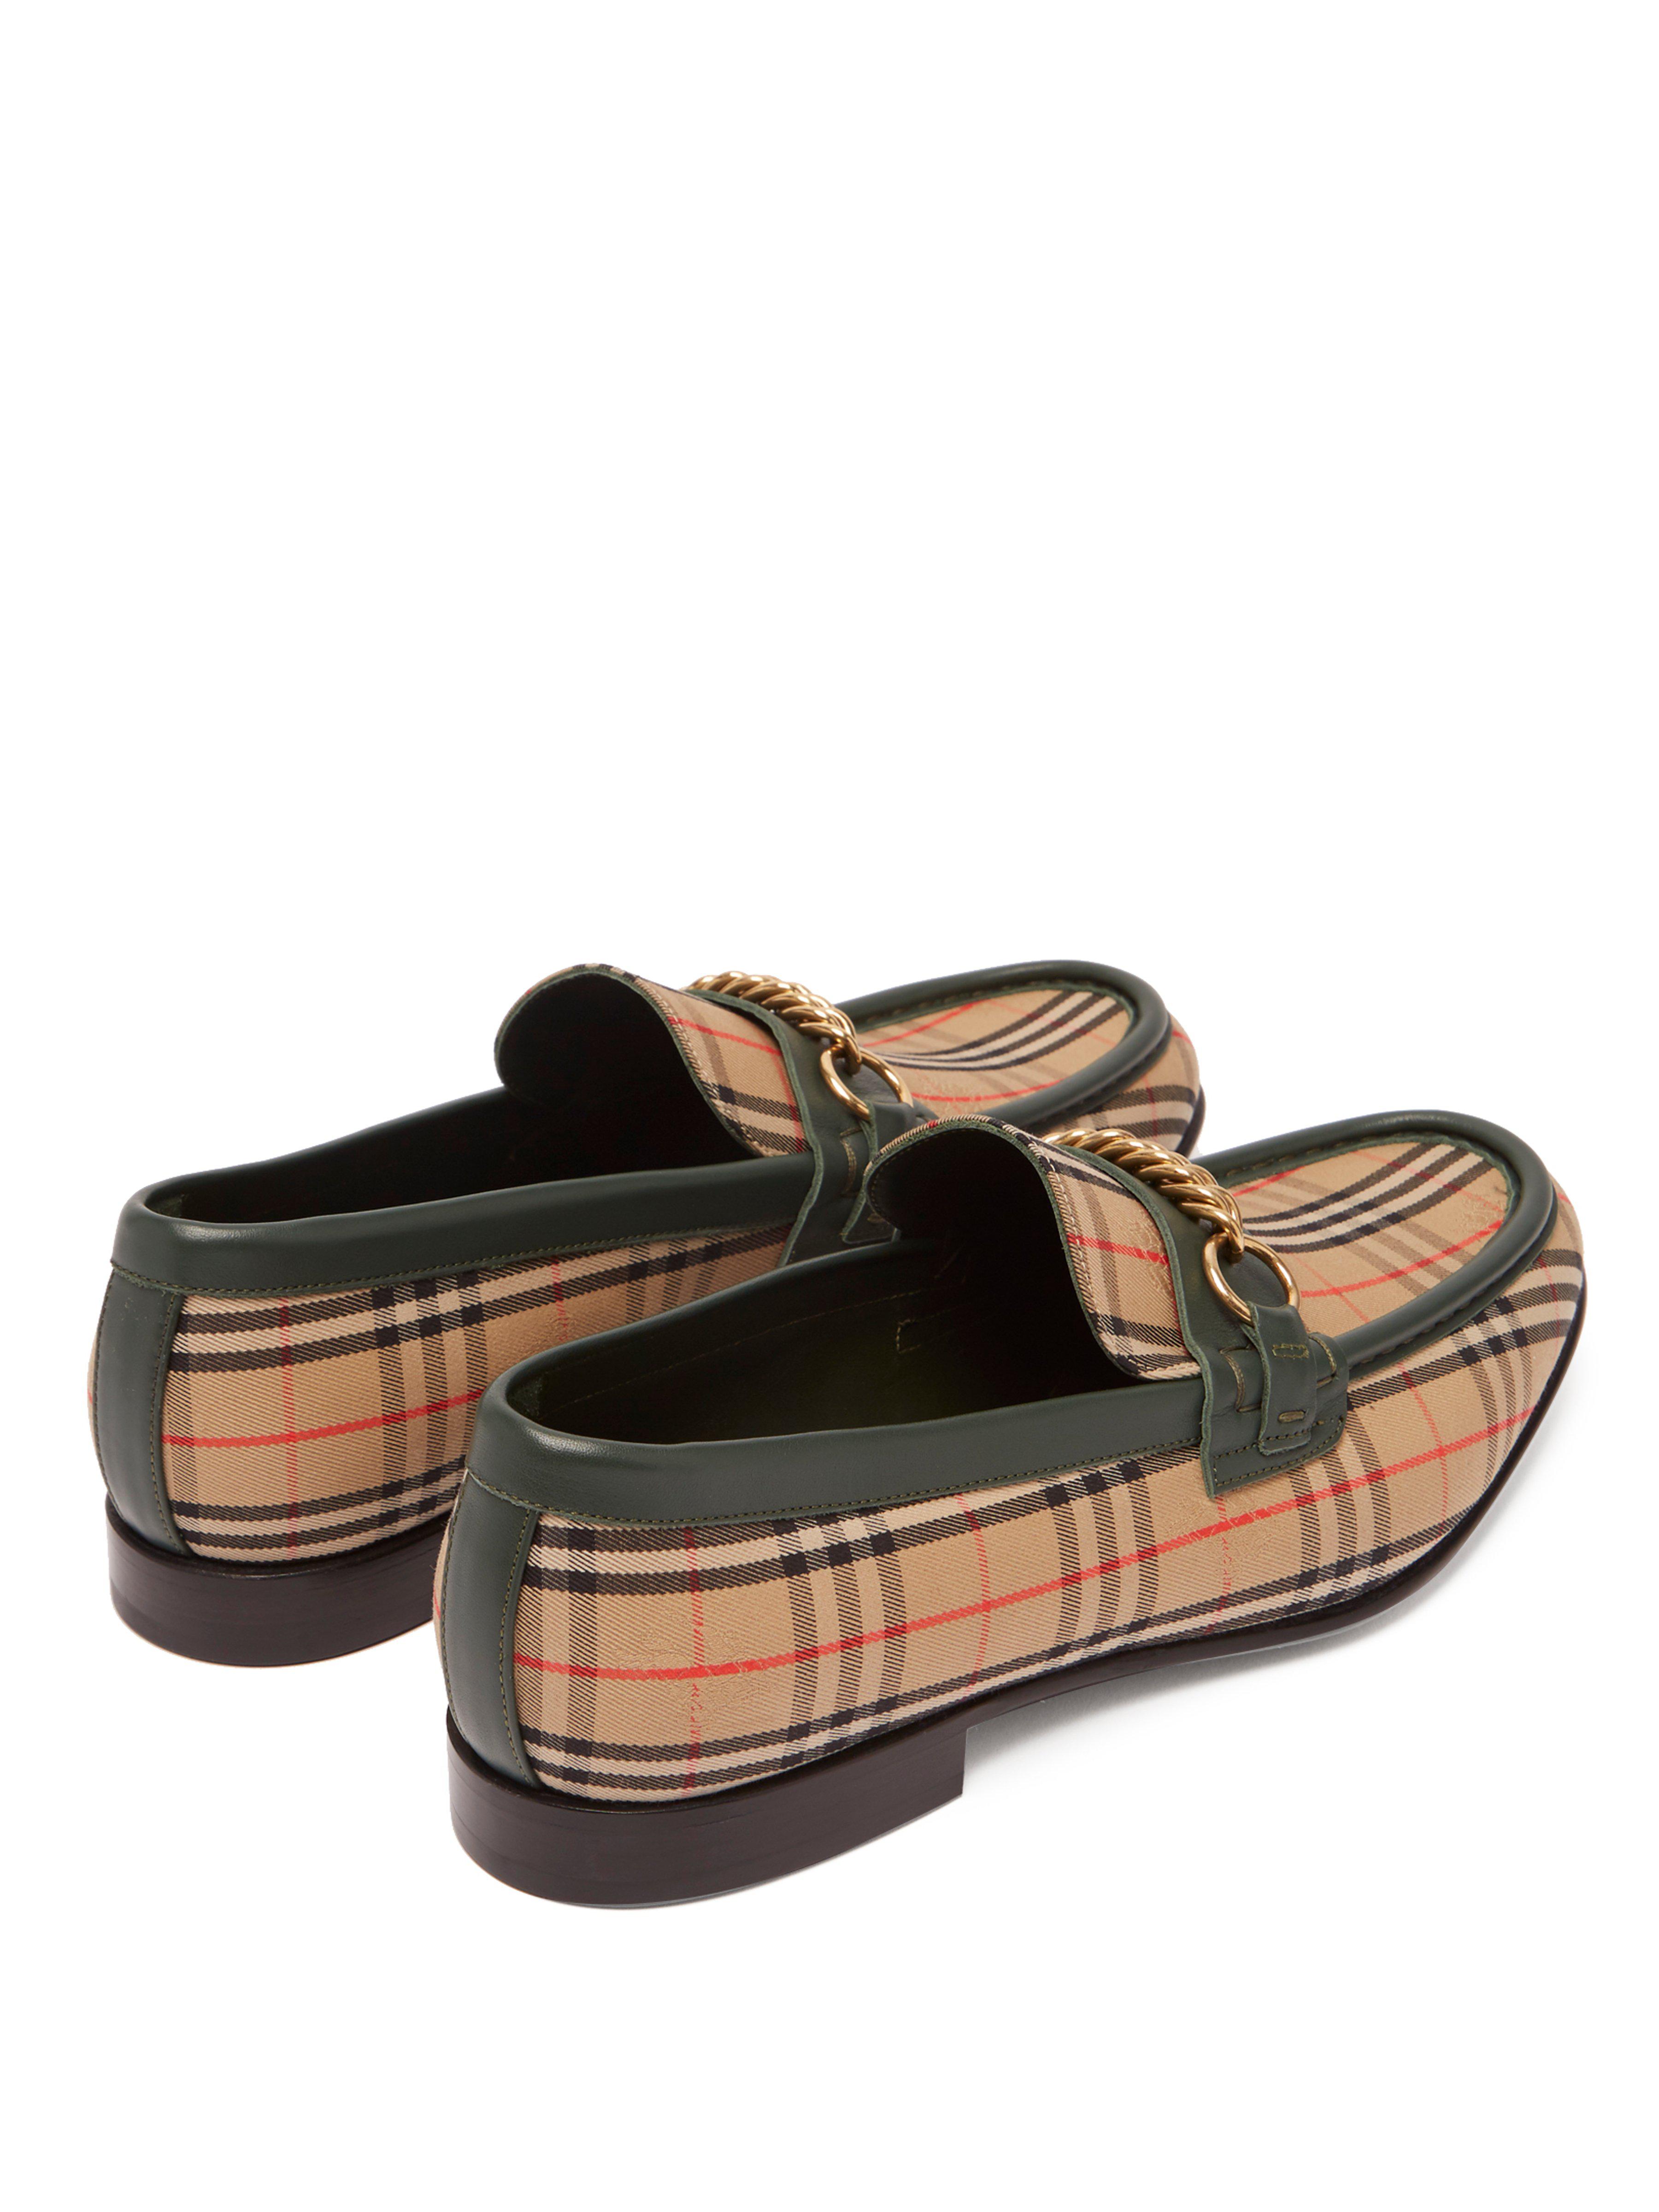 Burberry Moorely Dalston Vintage Check Canvas Loafers in Dark Forest ...